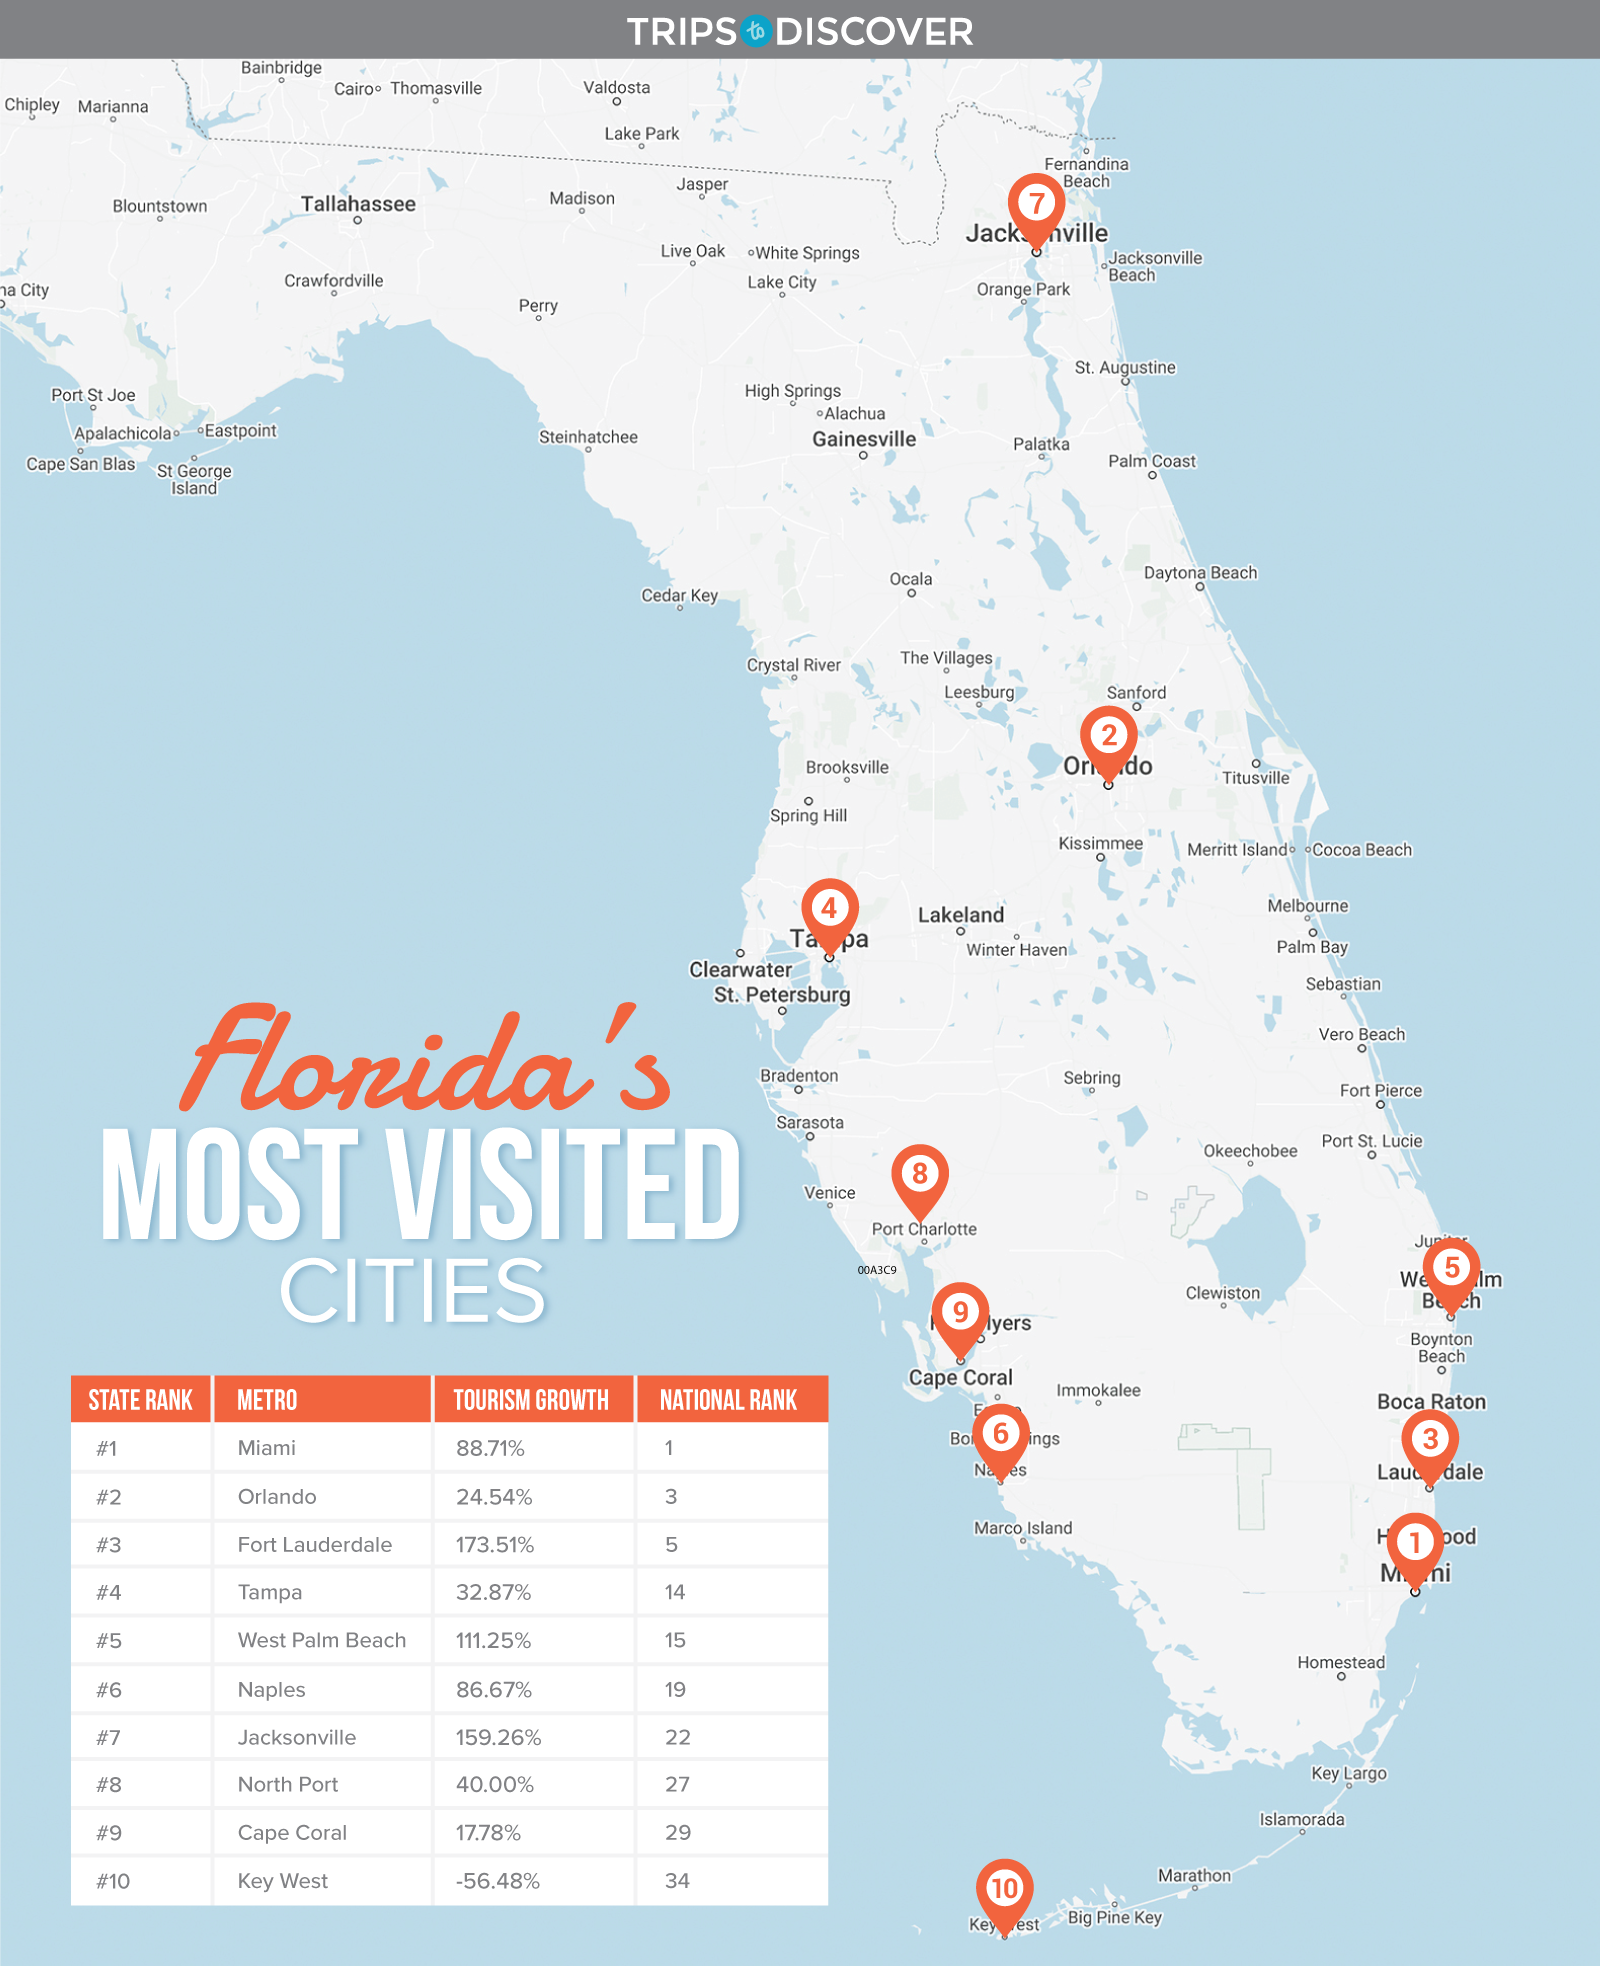 A map of Florida showing the ten most visited cities in the state